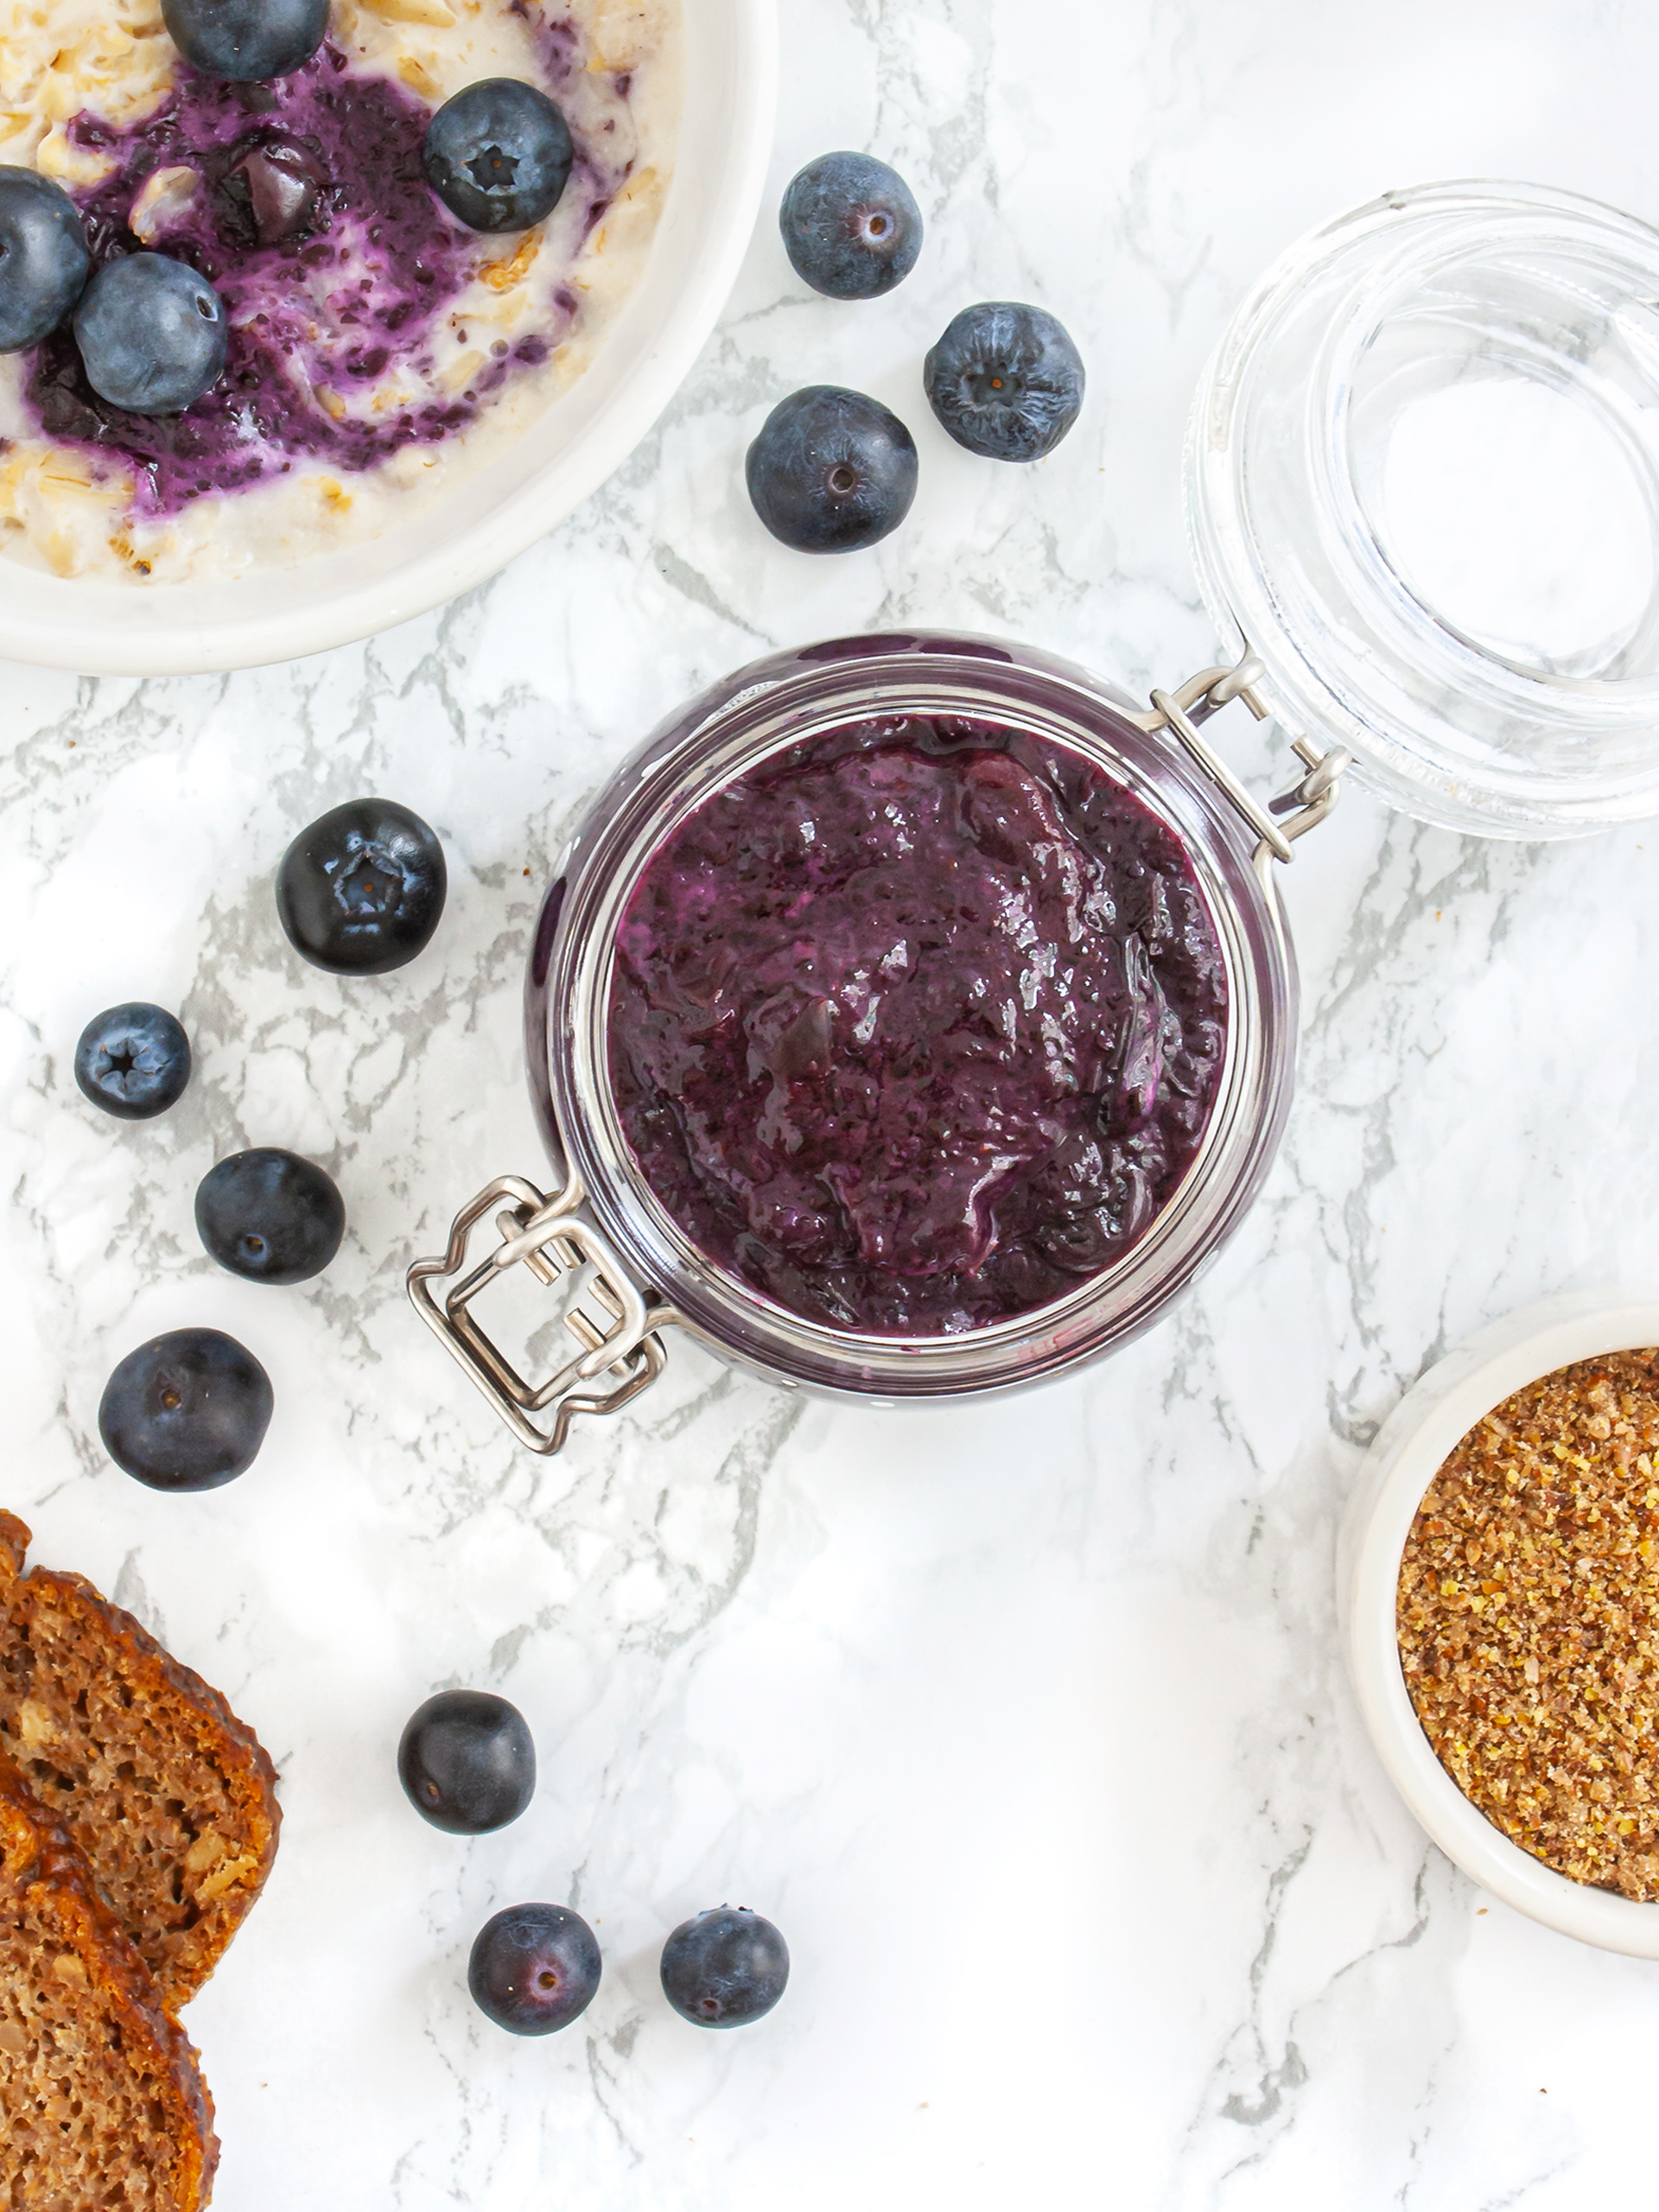 Sugar Free Blueberry Jam Recipe with Flaxseeds